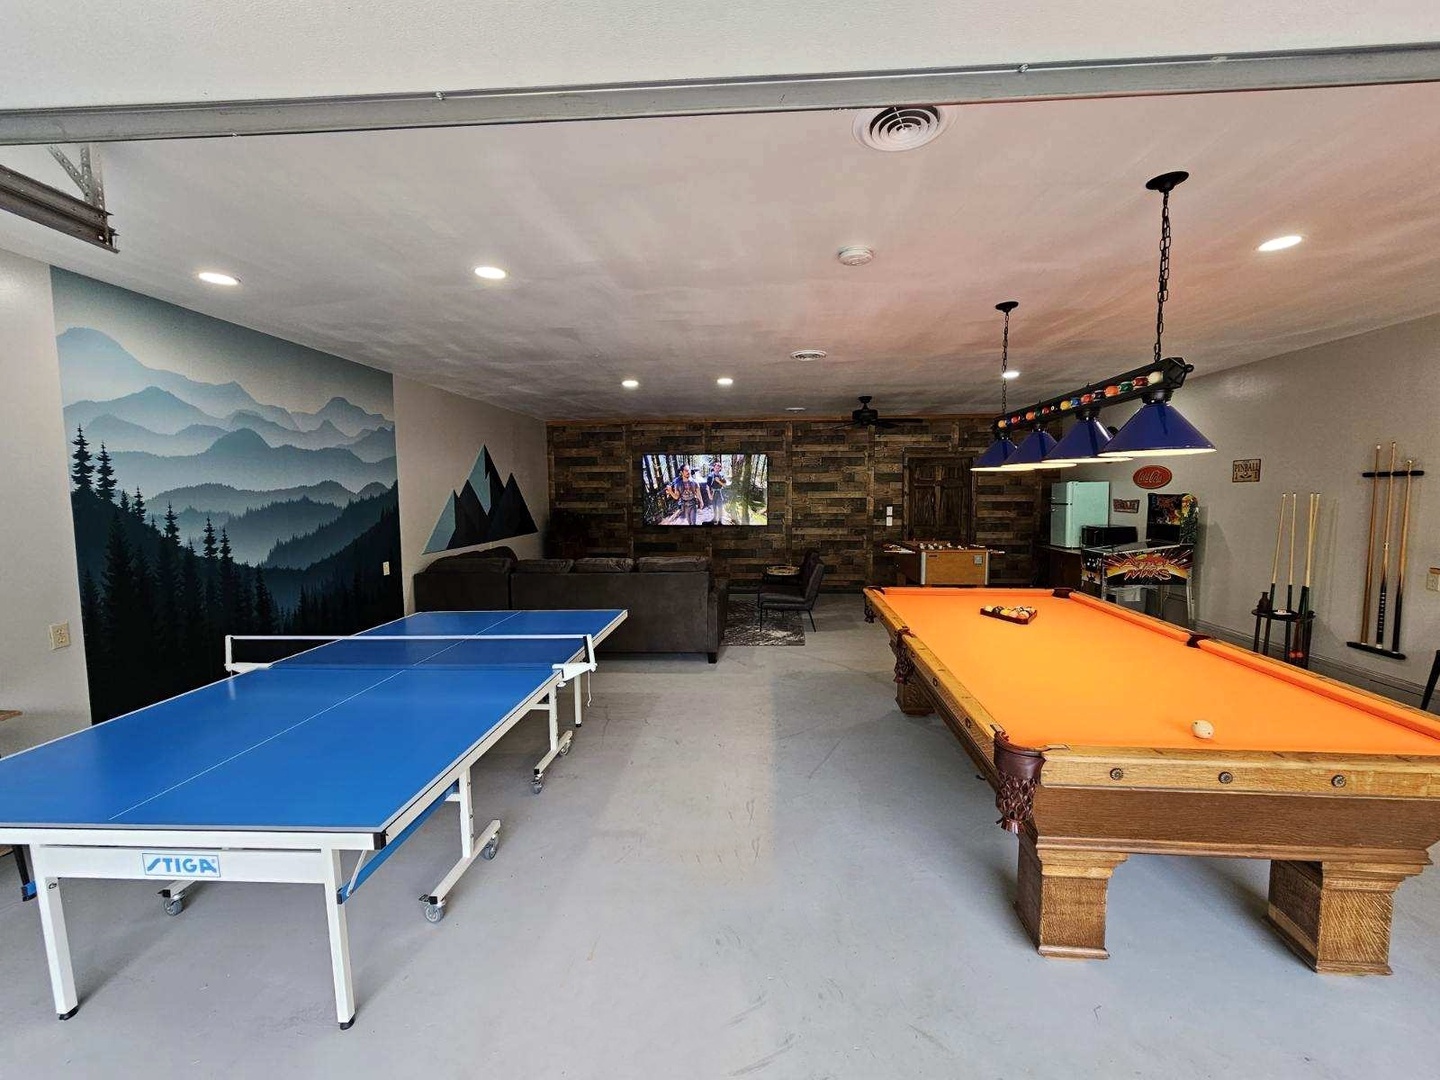 Ping Pong and Pool Table at Moonlit Mountain Lodge